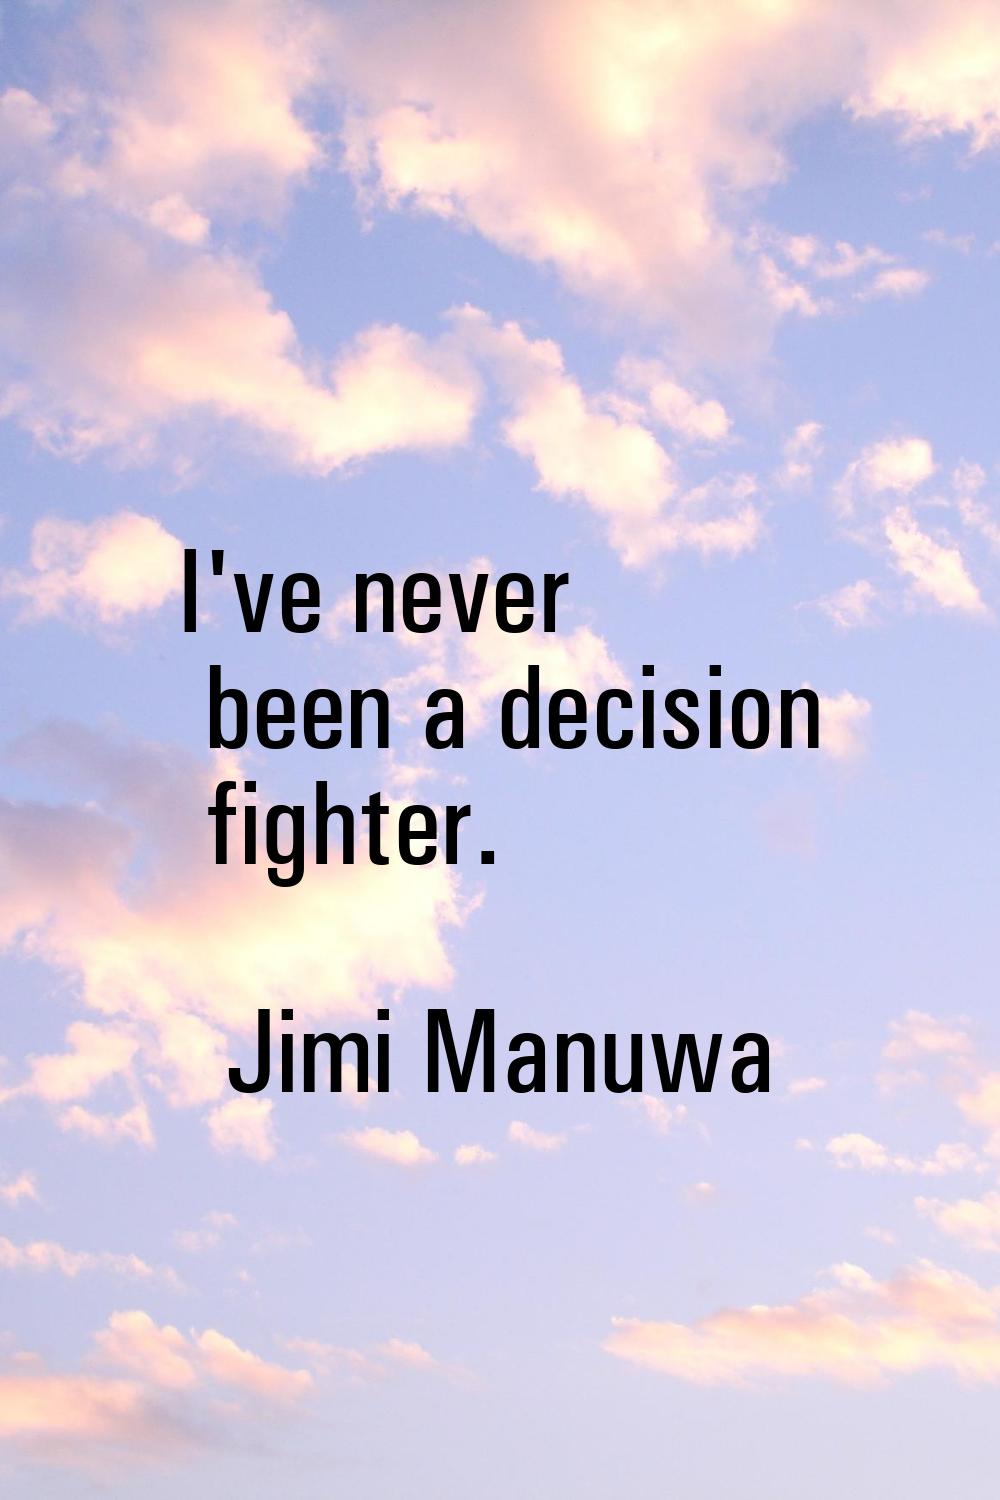 I've never been a decision fighter.